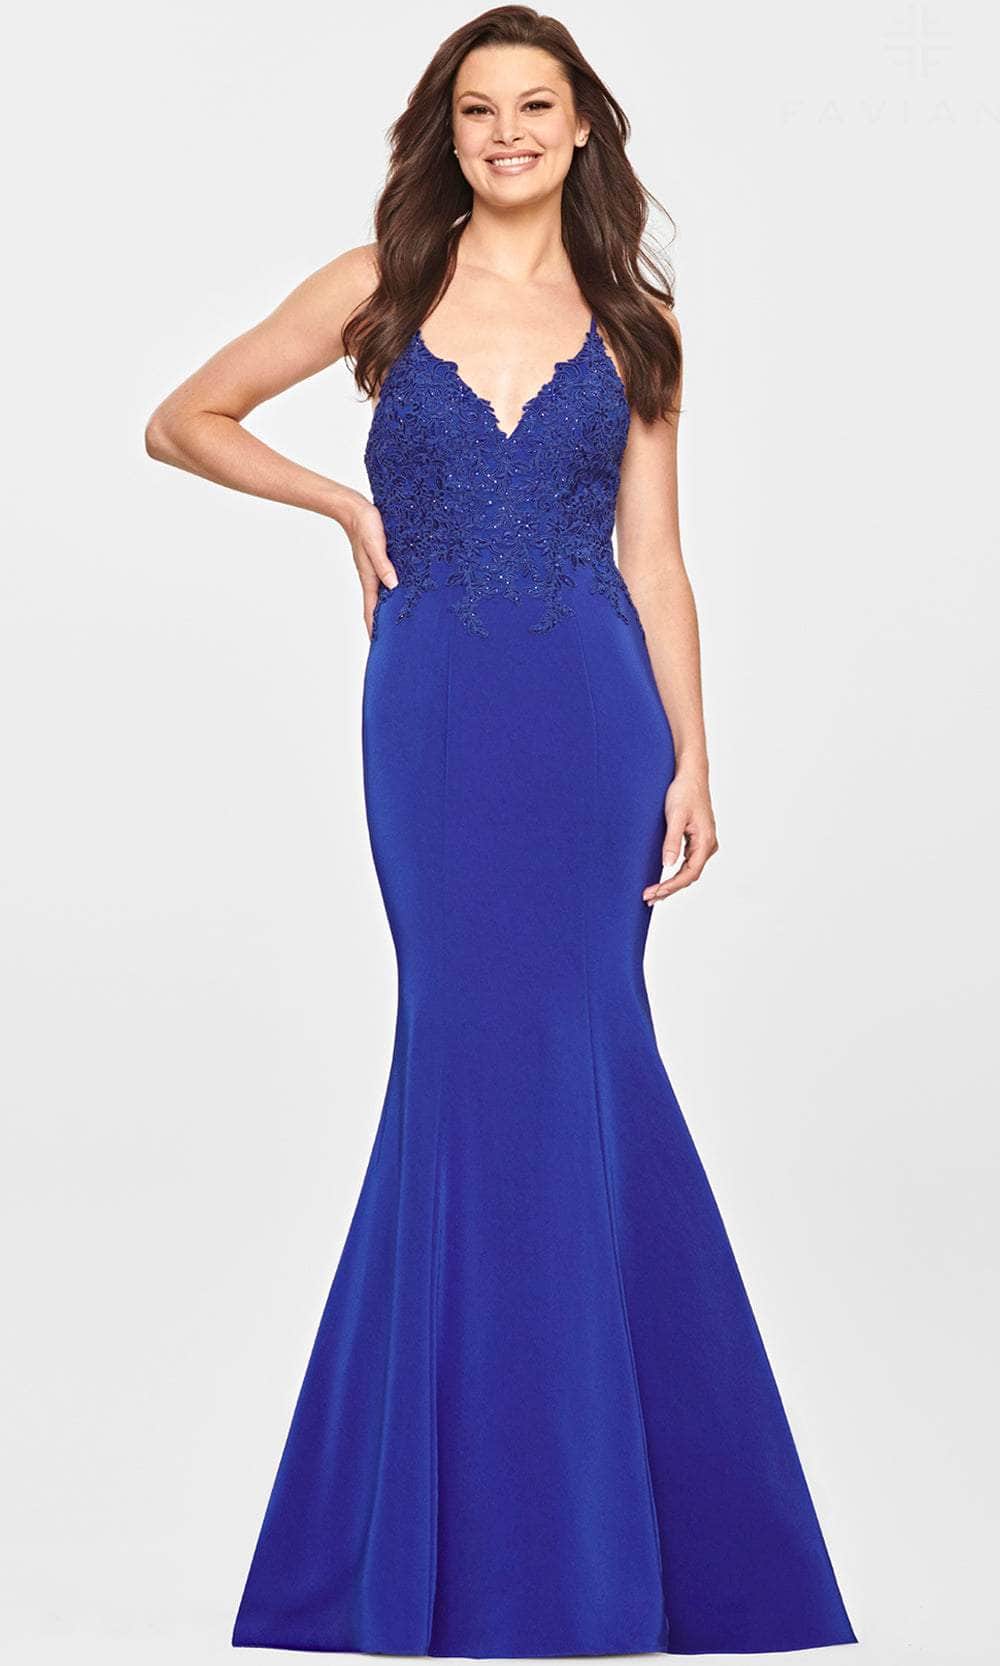 Image of Faviana S10821 - Lace Appliqued V-Neck Evening Gown